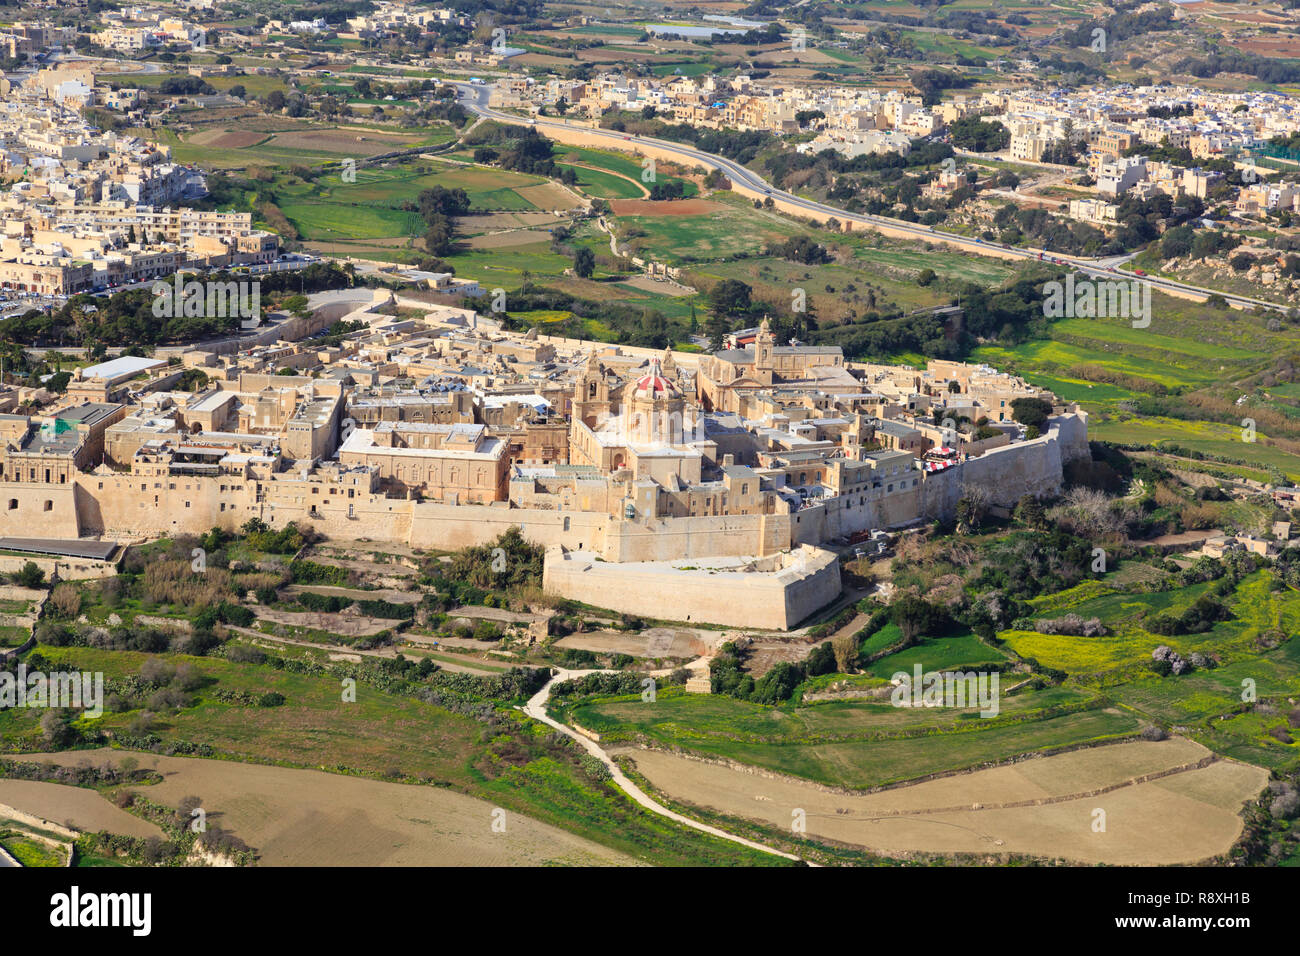 Aerial view of Mdina fortified town, Malta. Stock Photo